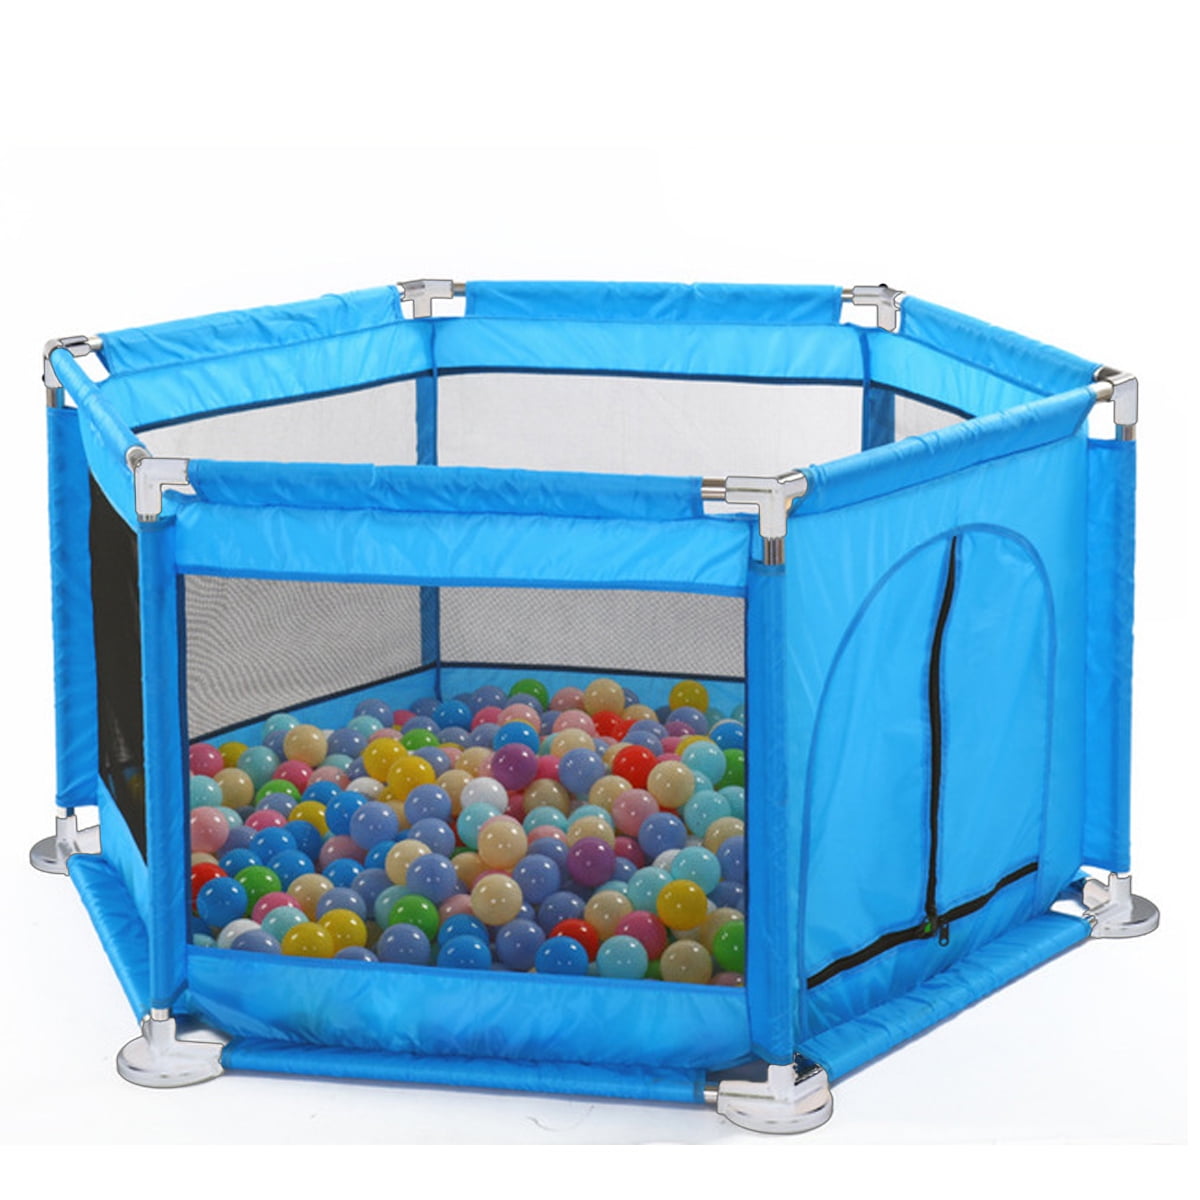 Baby Toddler Playpen Large Blue Ball Pit Pool Kids Indoor/ Outdoor Play Tent 